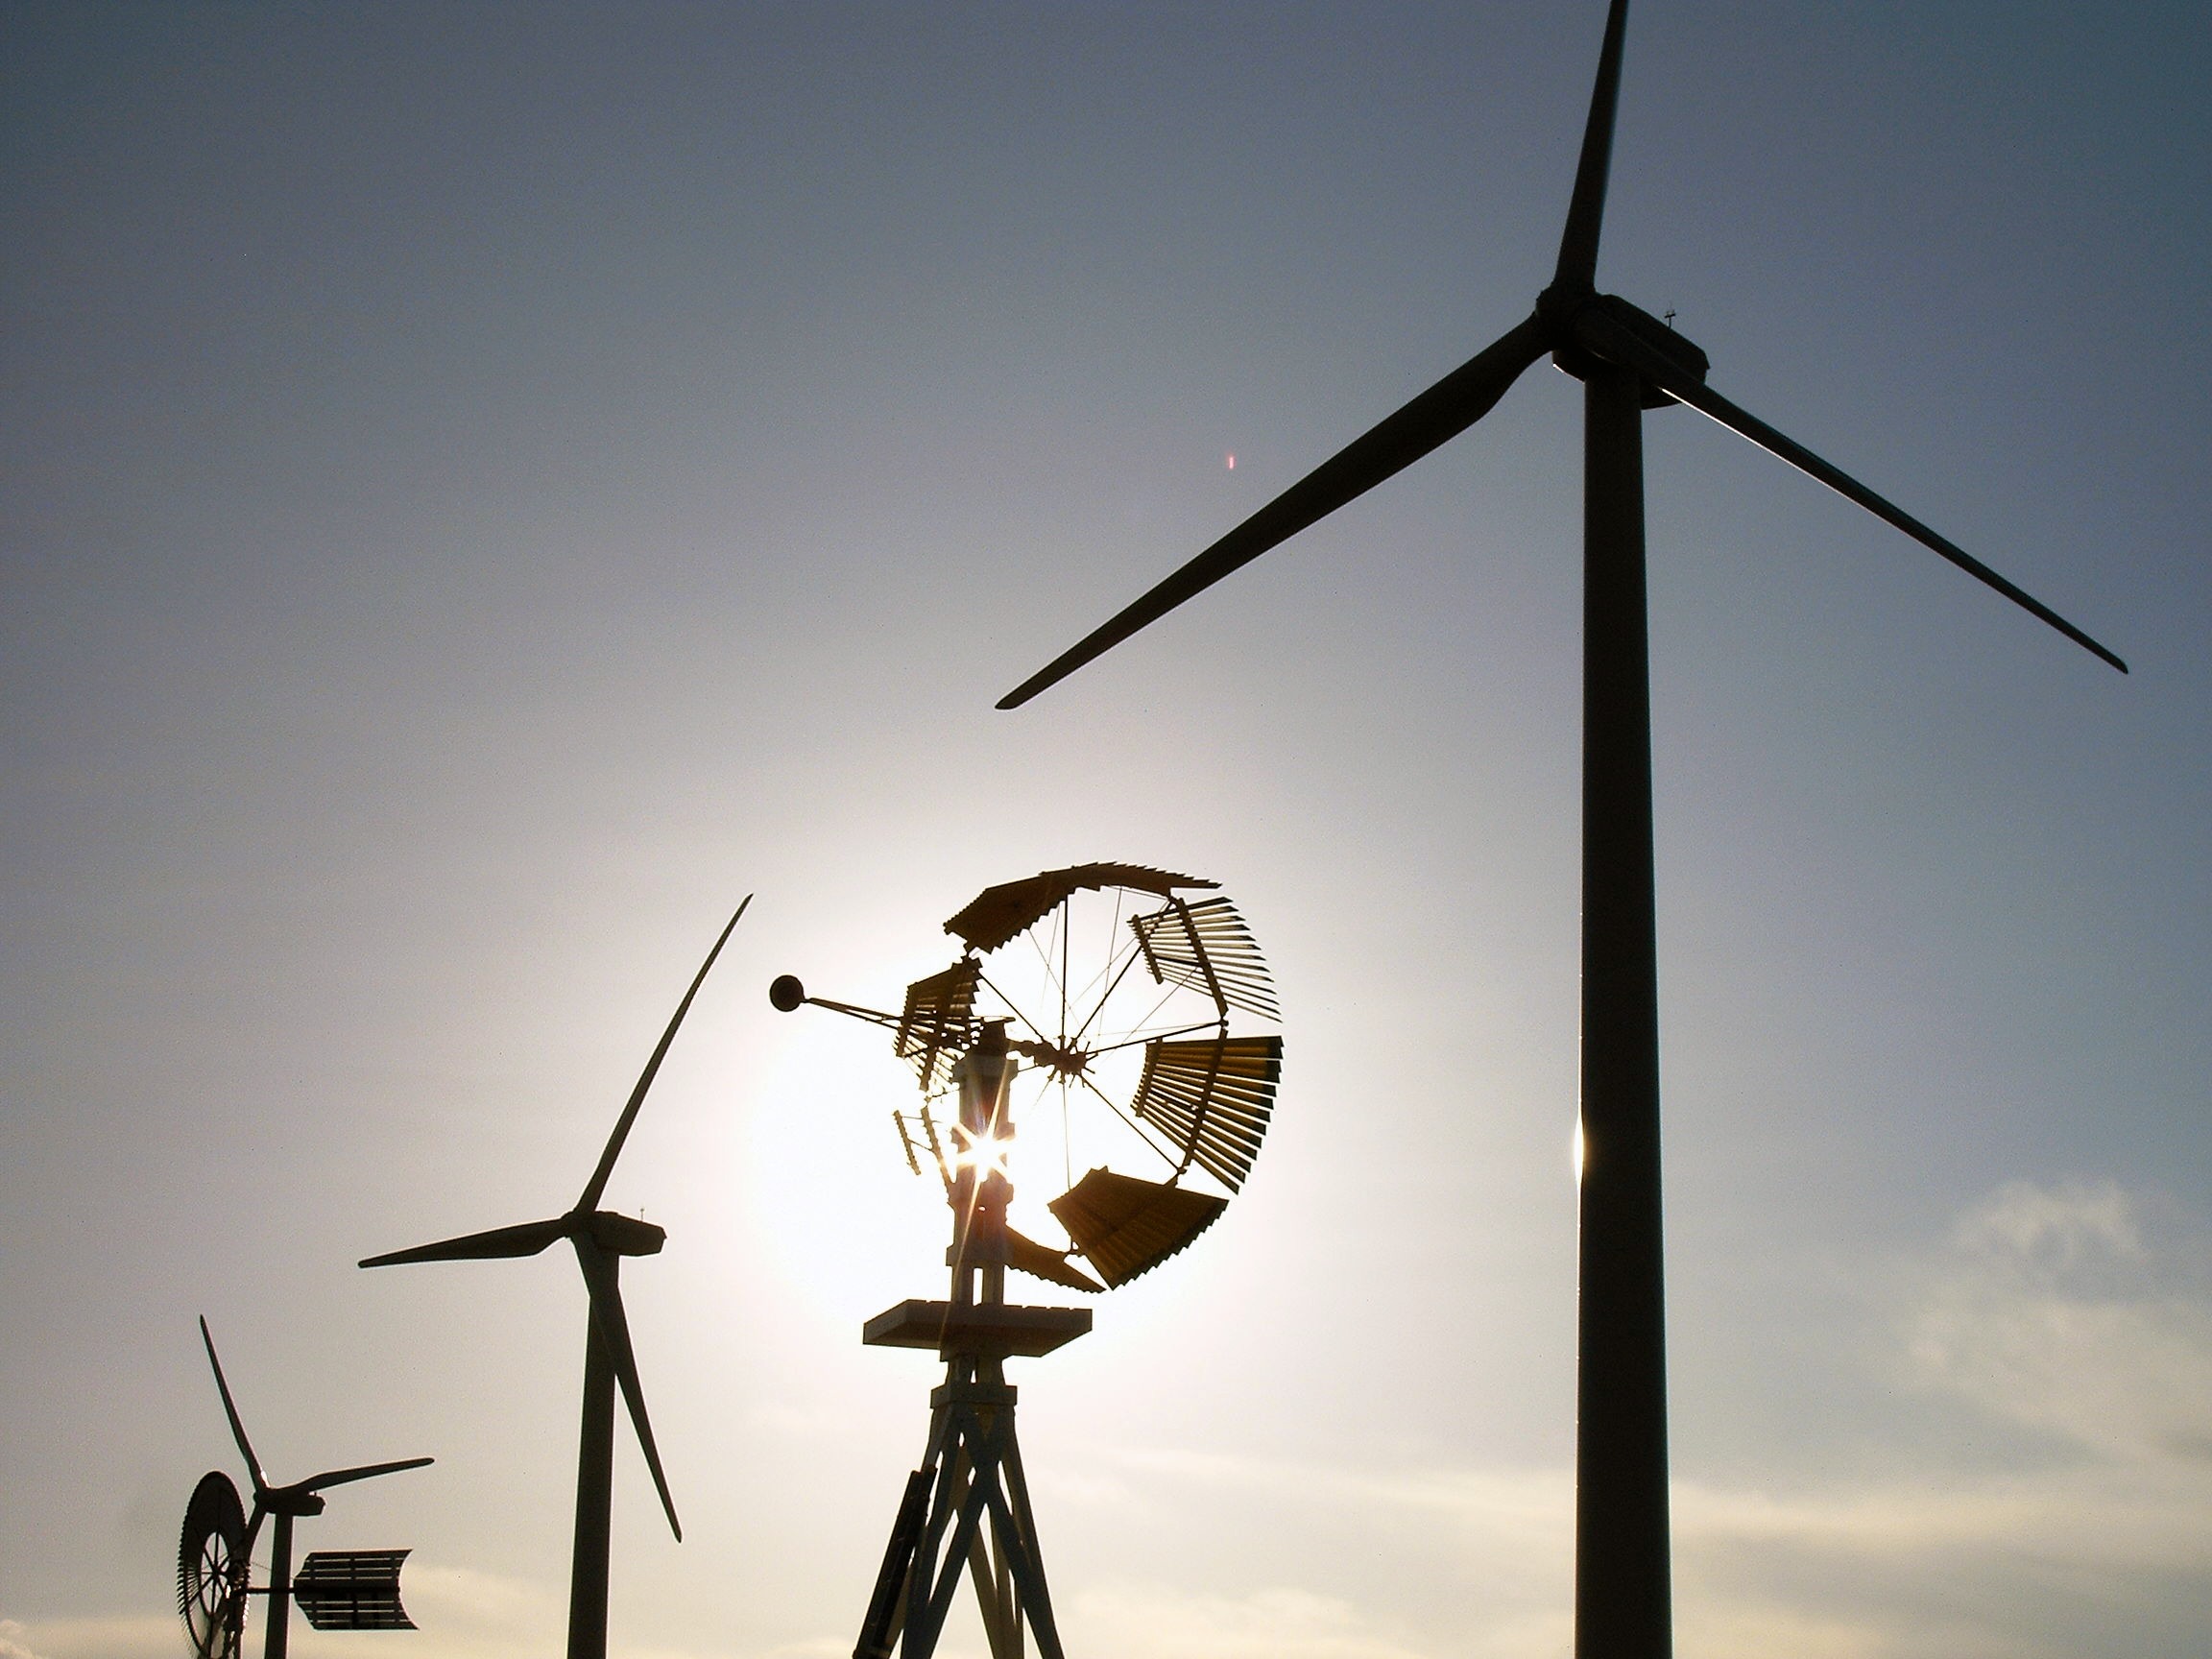 Modern-day wind turbines are mixed with old-school windmills, all silhouetted against the sky.